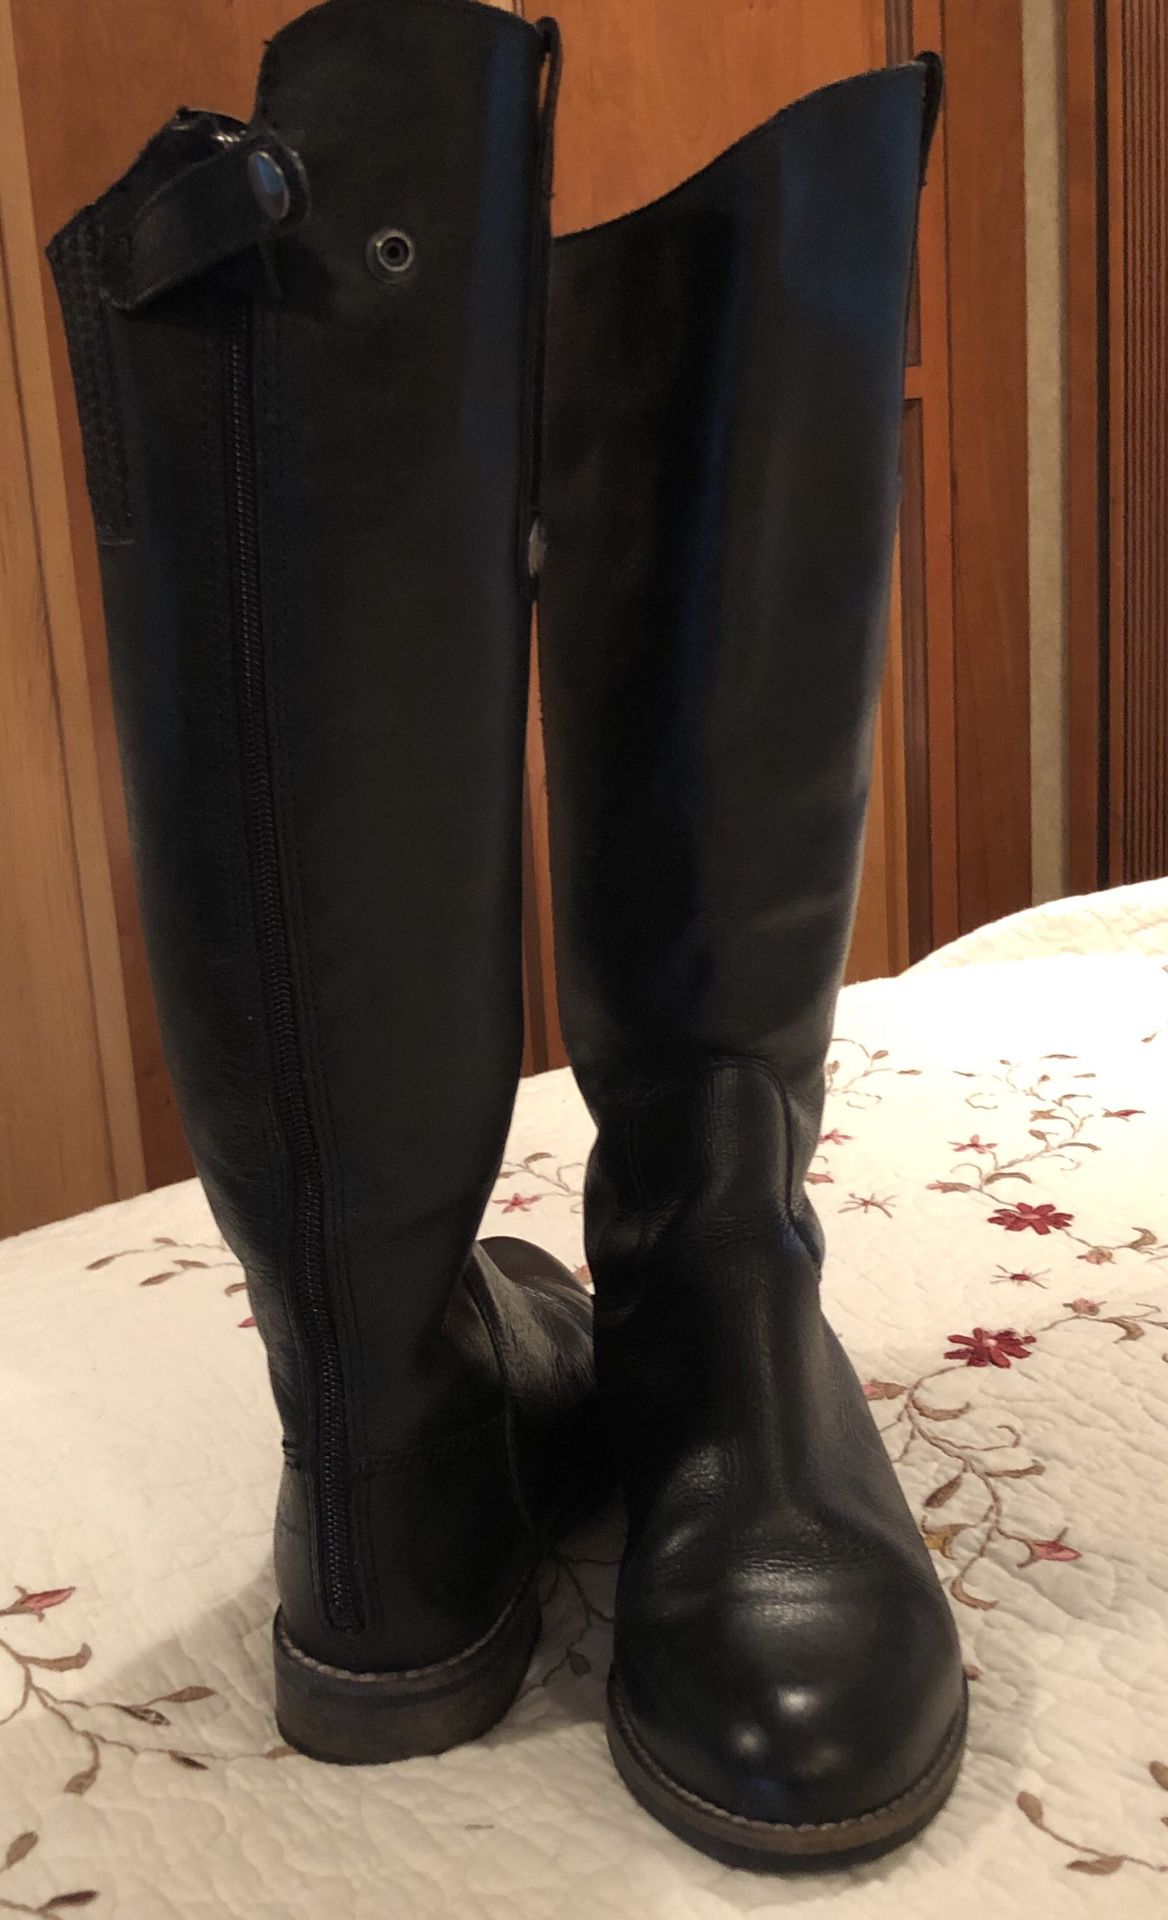 Matisse Yorker upper leather boot size 61/2